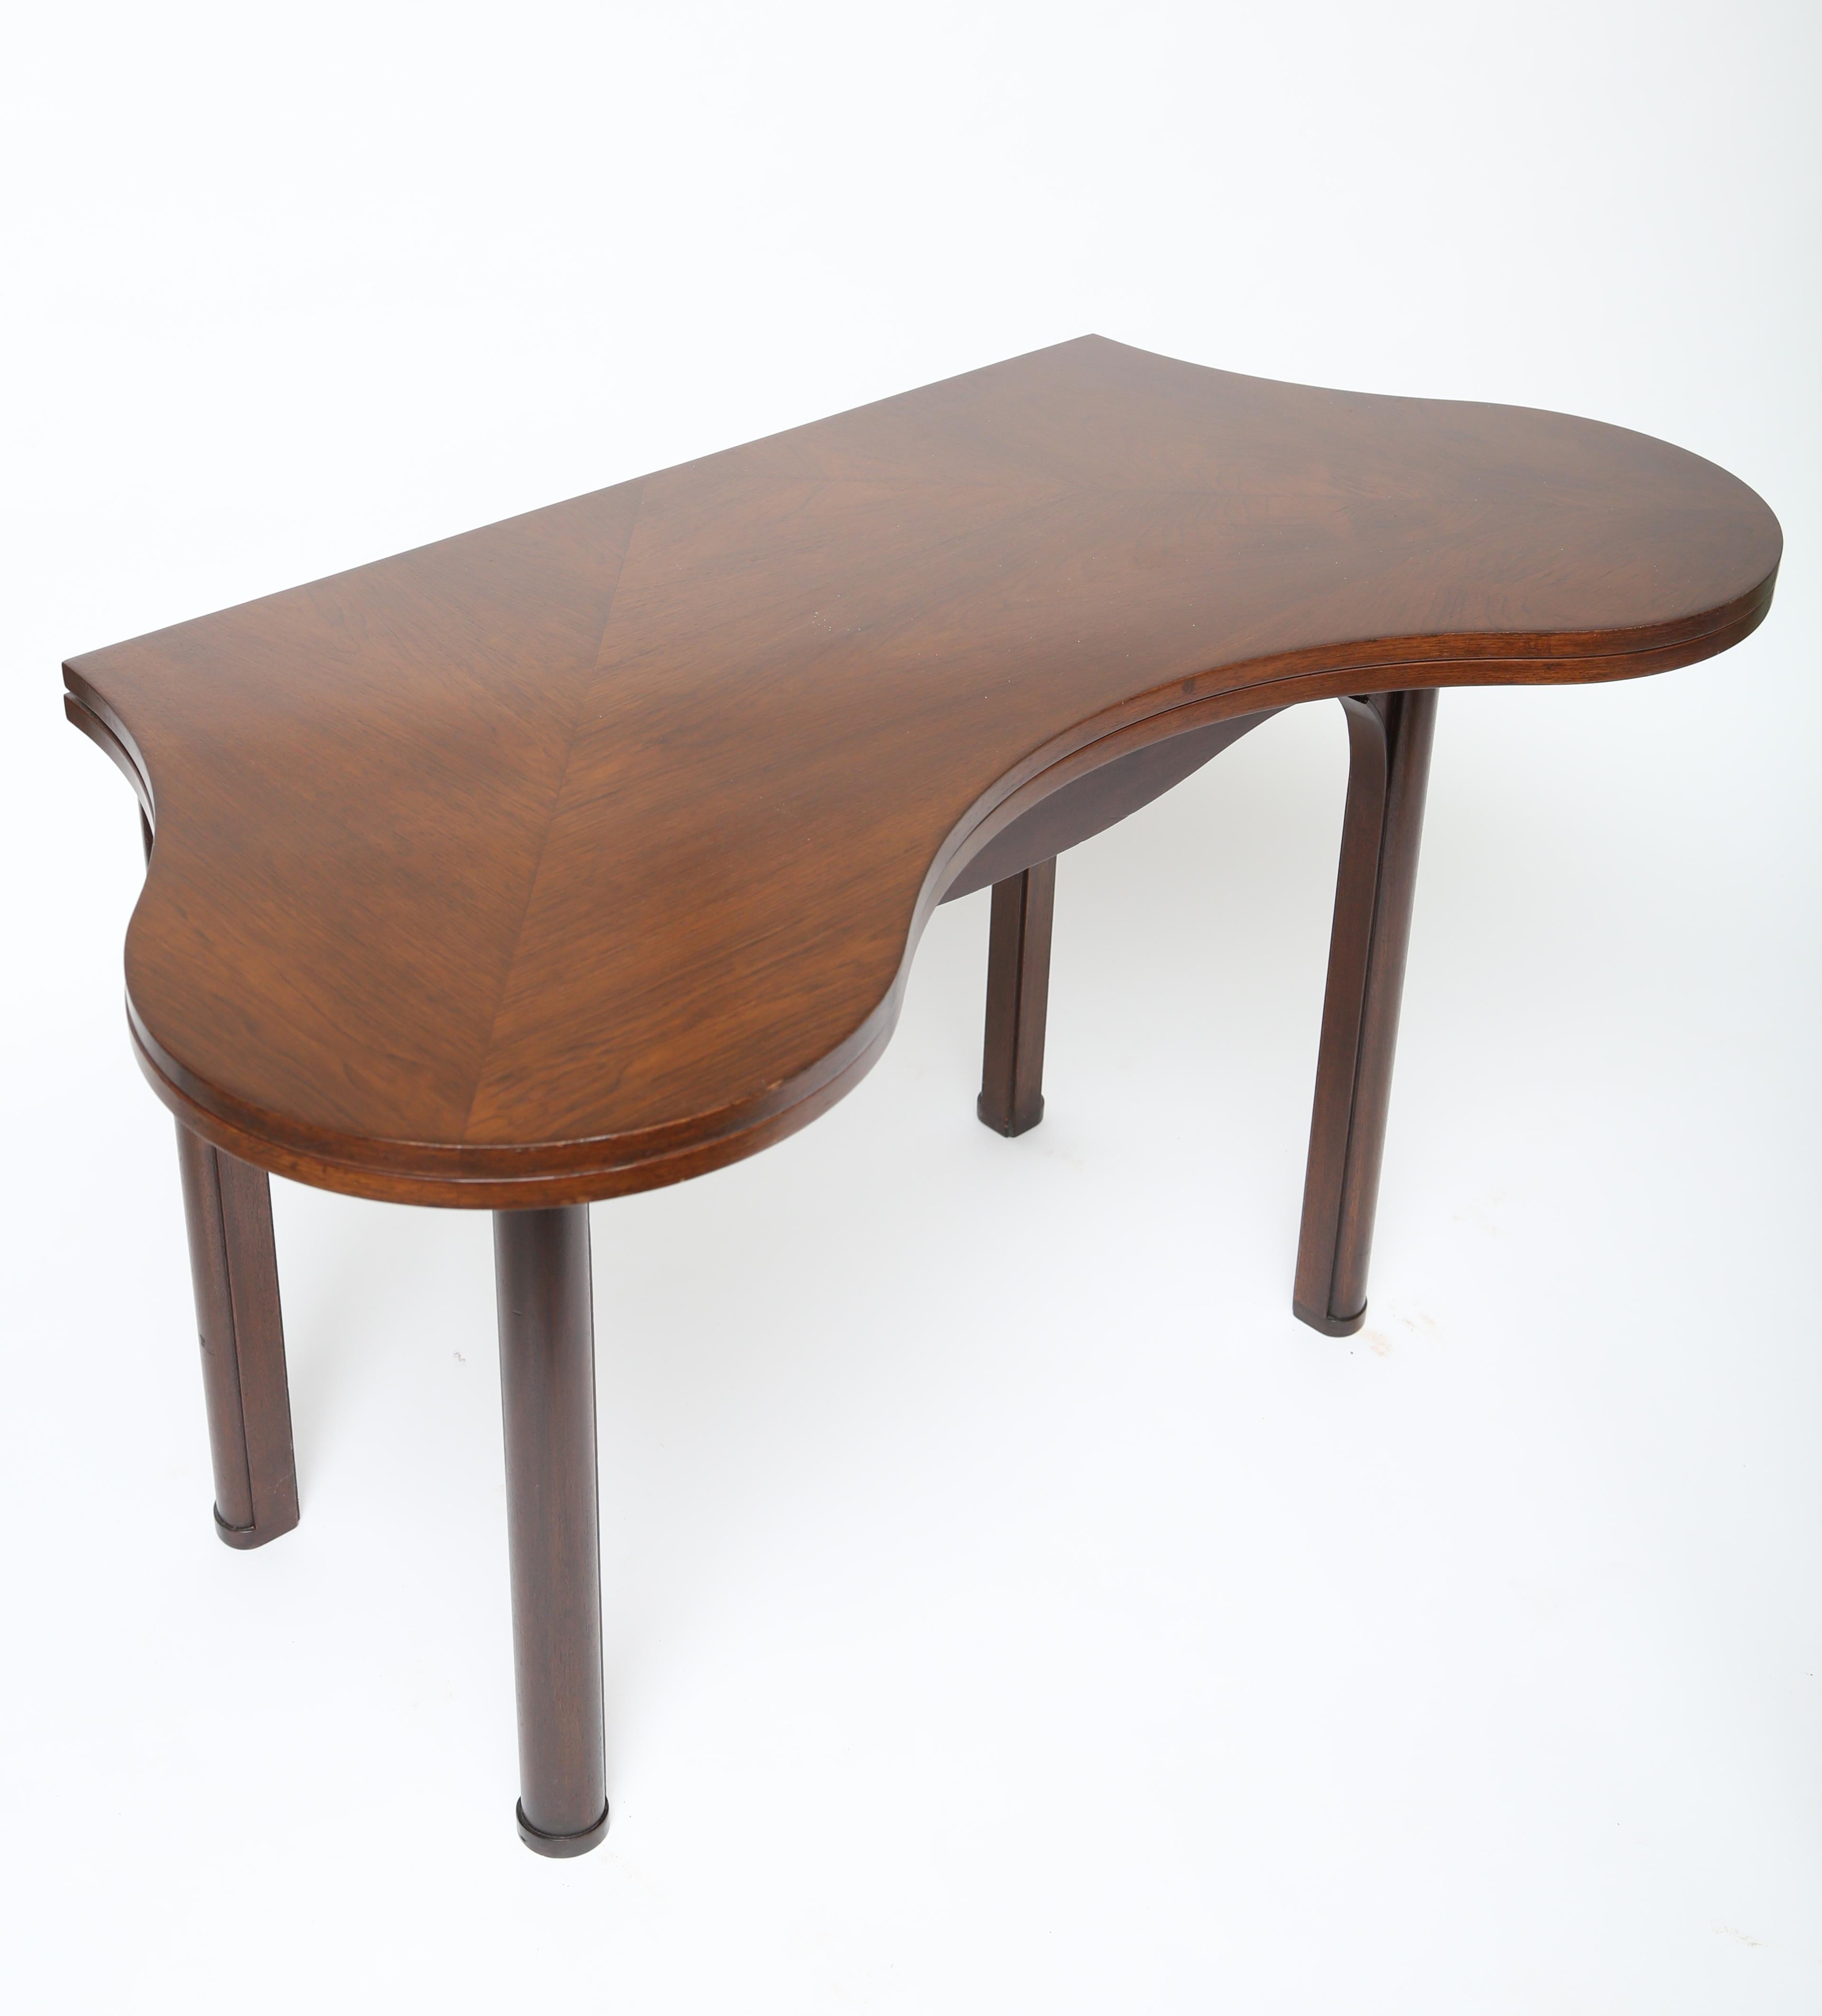 American Edward Wormley Special Order Drop-Front Clover Shaped Table